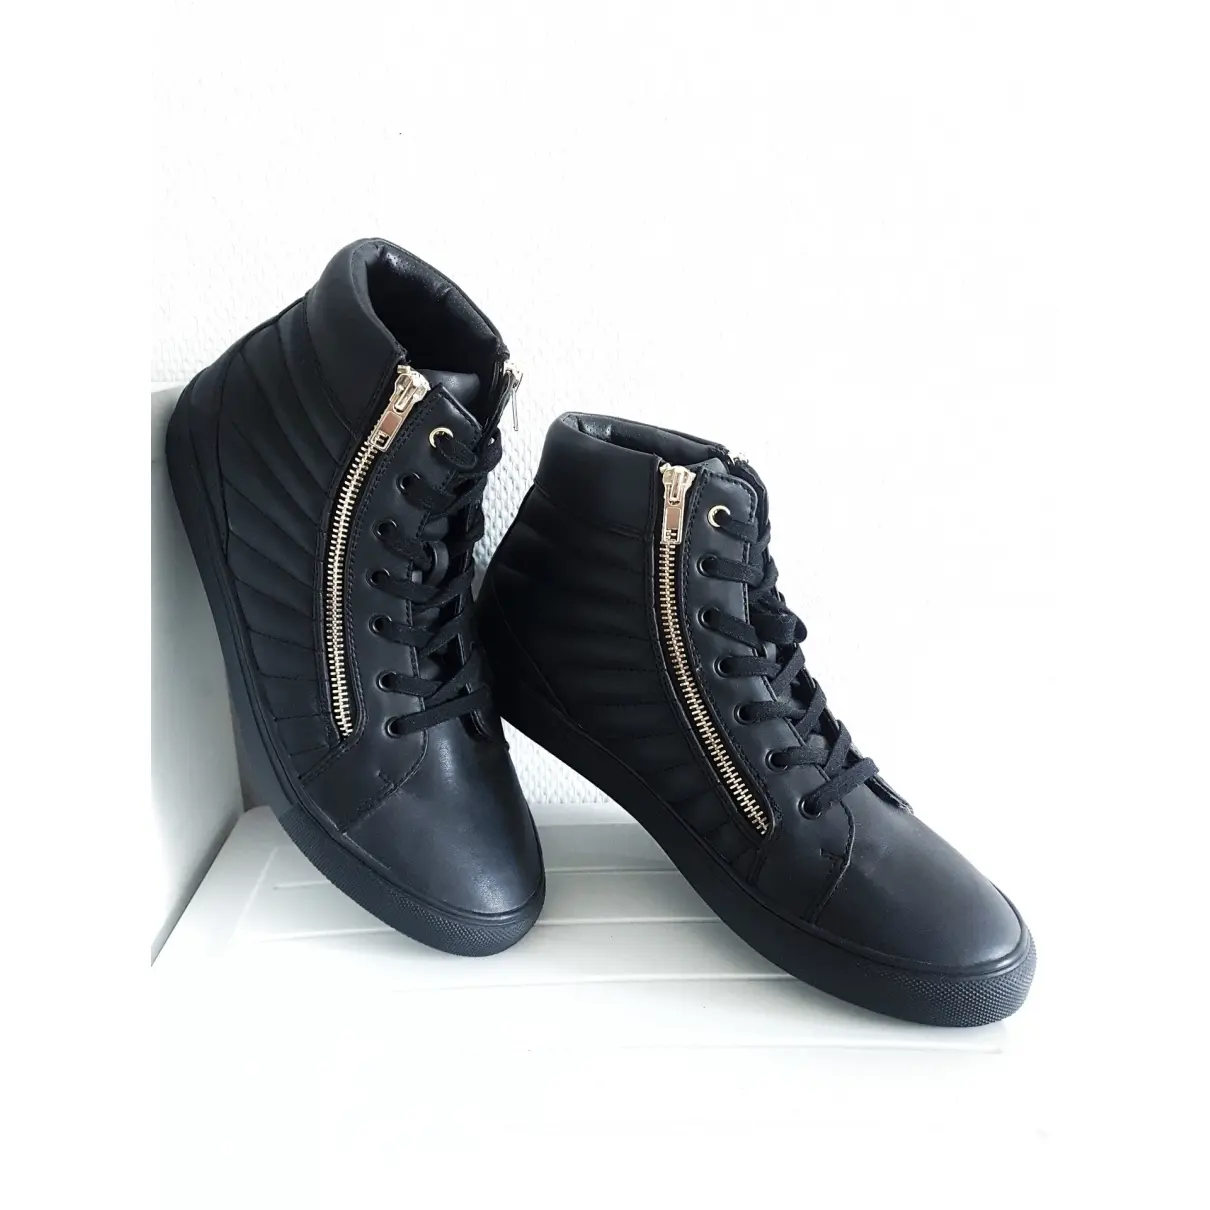 Steve Madden Leather high trainers for sale